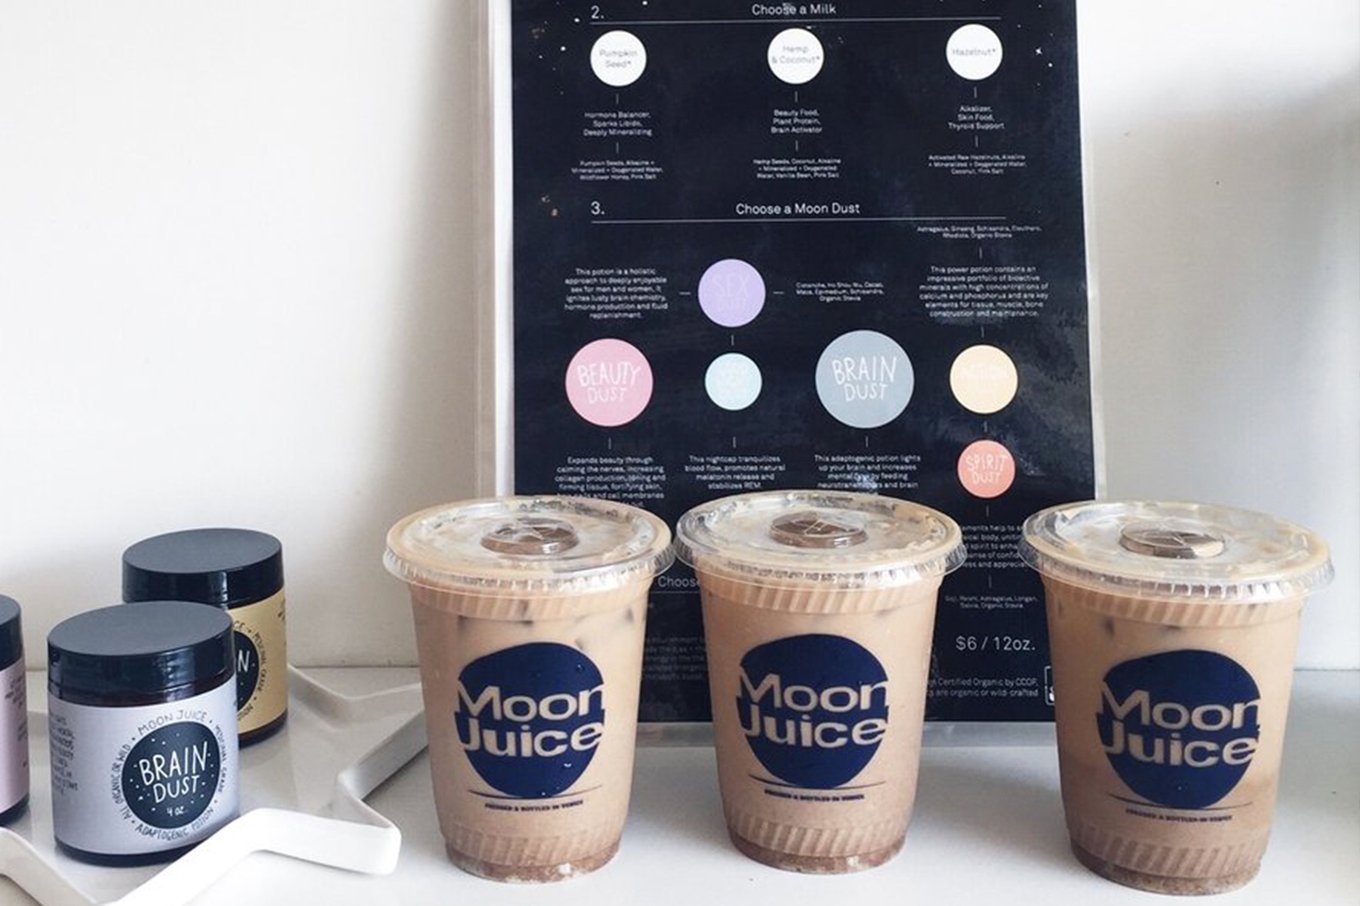 Moon Juice dusts and coffee in Los Angeles, California